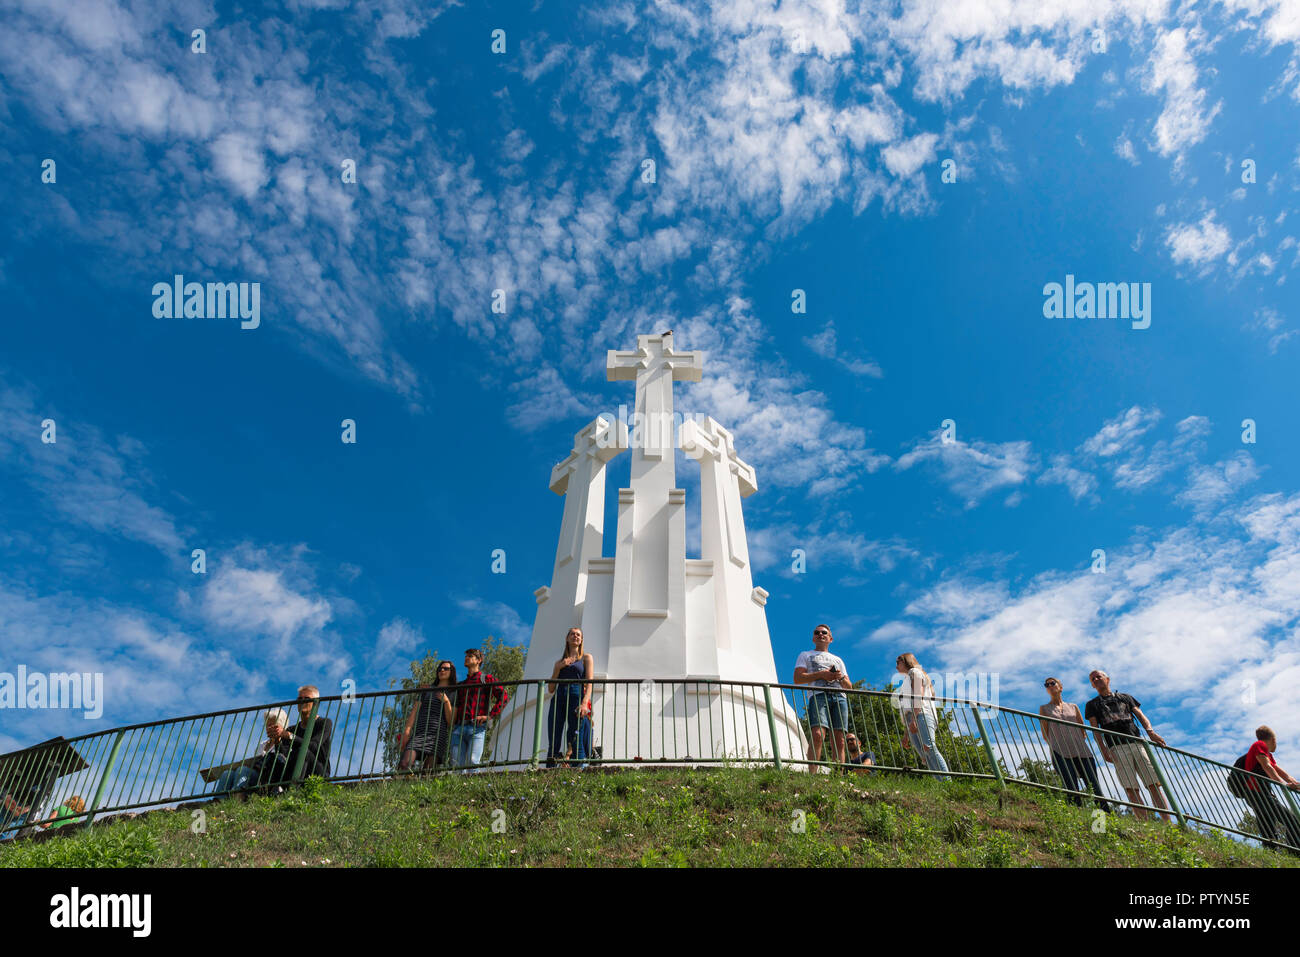 Vilnius Three Crosses Hill, view of tourists standing on the terrace on Three Crosses Hill and looking down on the city of Vilnius below, Lithuania. Stock Photo